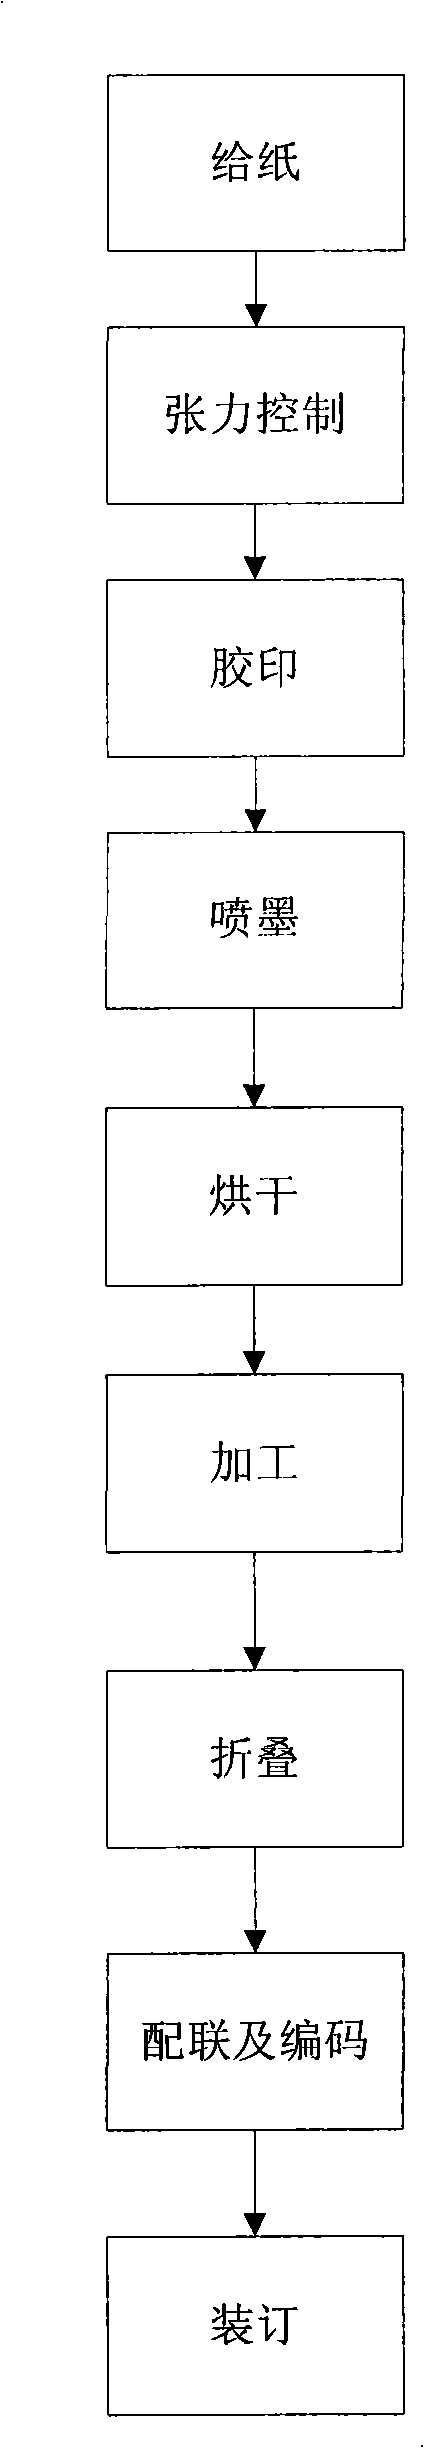 Multi hand writing invoice continuous rotary printing method